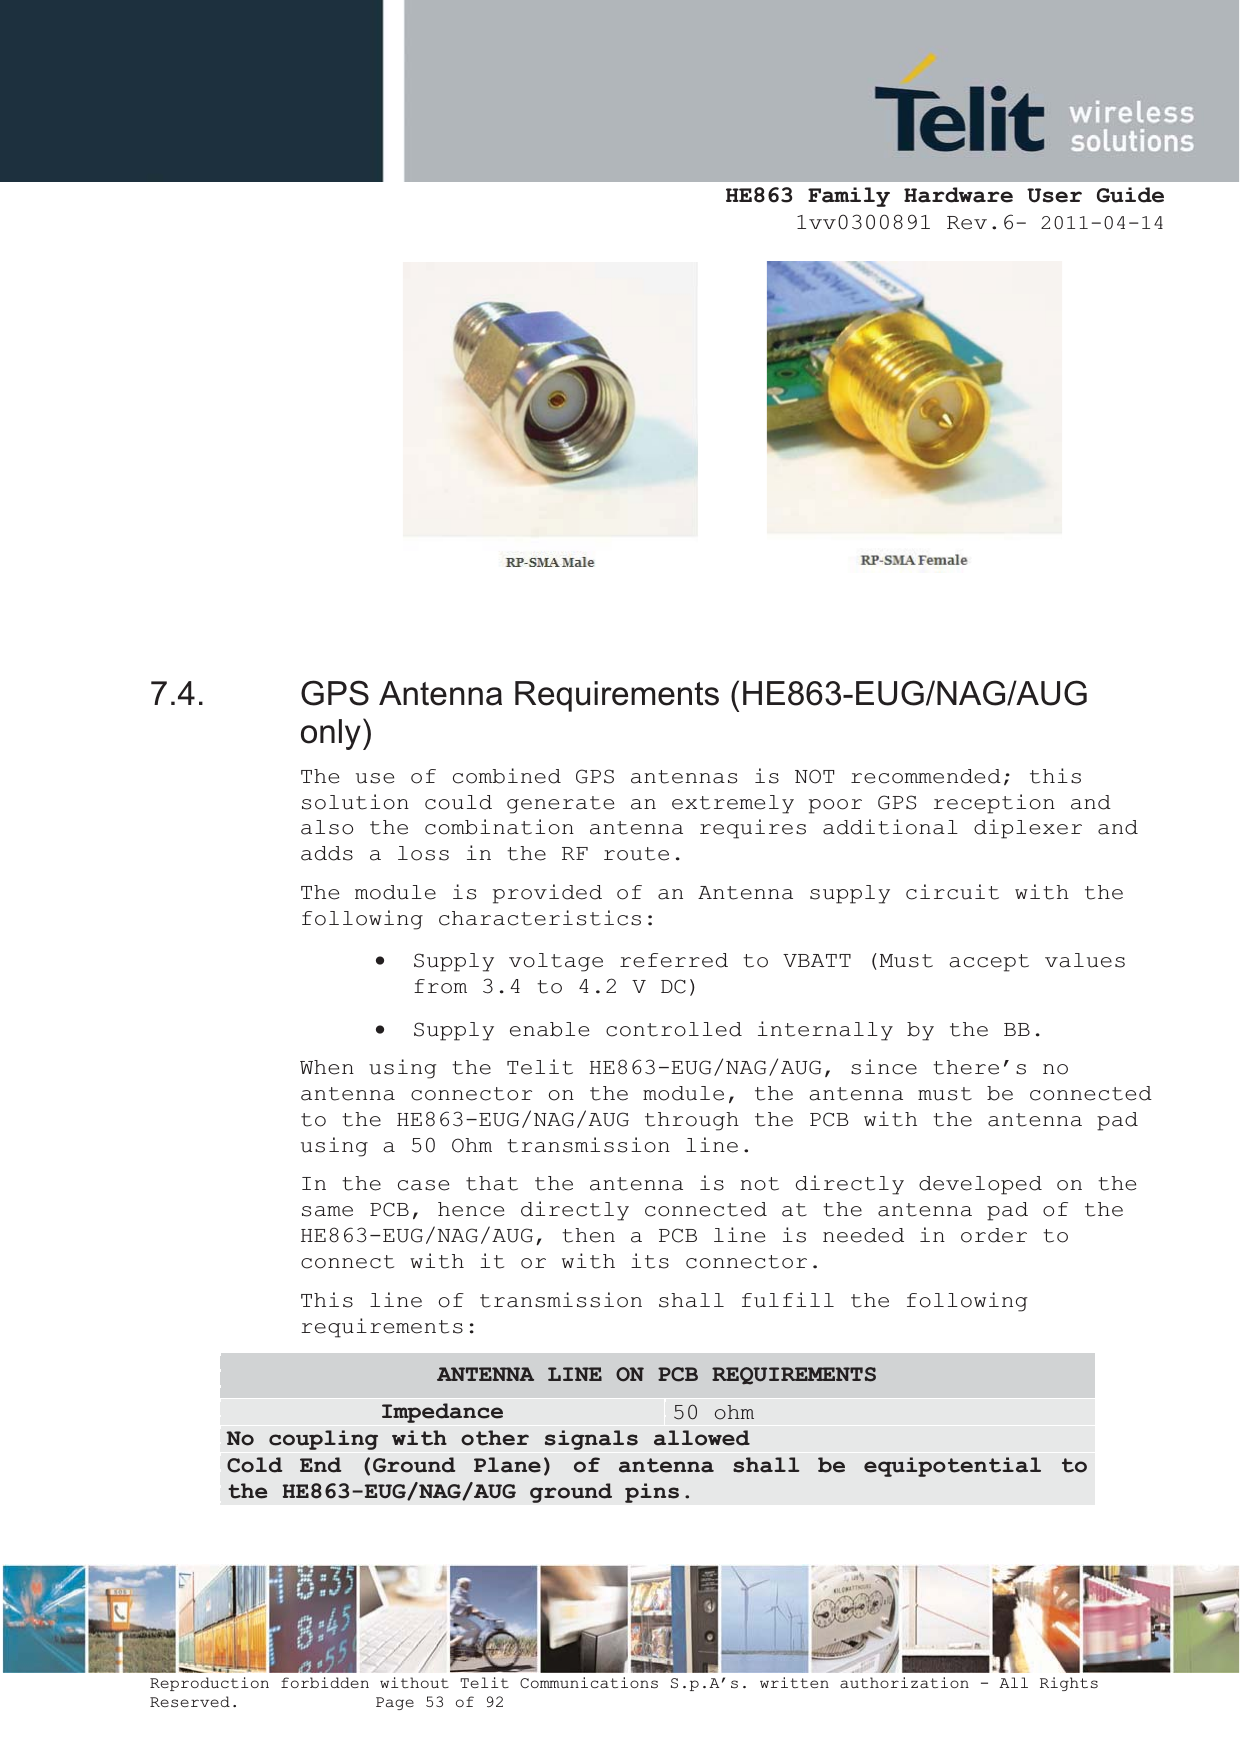  HE863 Family Hardware User Guide 1vv0300891 Rev.6- 2011-04-14    Reproduction forbidden without Telit Communications S.p.A’s. written authorization - All Rights Reserved.    Page 53 of 92           7.4.  GPS Antenna Requirements (HE863-EUG/NAG/AUG only) The use of combined GPS antennas is NOT recommended; this solution could generate an extremely poor GPS reception and also the combination antenna requires additional diplexer and adds a loss in the RF route. The module is provided of an Antenna supply circuit with the following characteristics: x Supply voltage referred to VBATT (Must accept values from 3.4 to 4.2 V DC) x Supply enable controlled internally by the BB. When using the Telit HE863-EUG/NAG/AUG, since there’s no antenna connector on the module, the antenna must be connected to the HE863-EUG/NAG/AUG through the PCB with the antenna pad using a 50 Ohm transmission line. In the case that the antenna is not directly developed on the same PCB, hence directly connected at the antenna pad of the HE863-EUG/NAG/AUG, then a PCB line is needed in order to connect with it or with its connector. This line of transmission shall fulfill the following requirements: ANTENNA LINE ON PCB REQUIREMENTS Impedance 50 ohm No coupling with other signals allowed Cold End (Ground Plane) of antenna shall be equipotential to the HE863-EUG/NAG/AUG ground pins. 